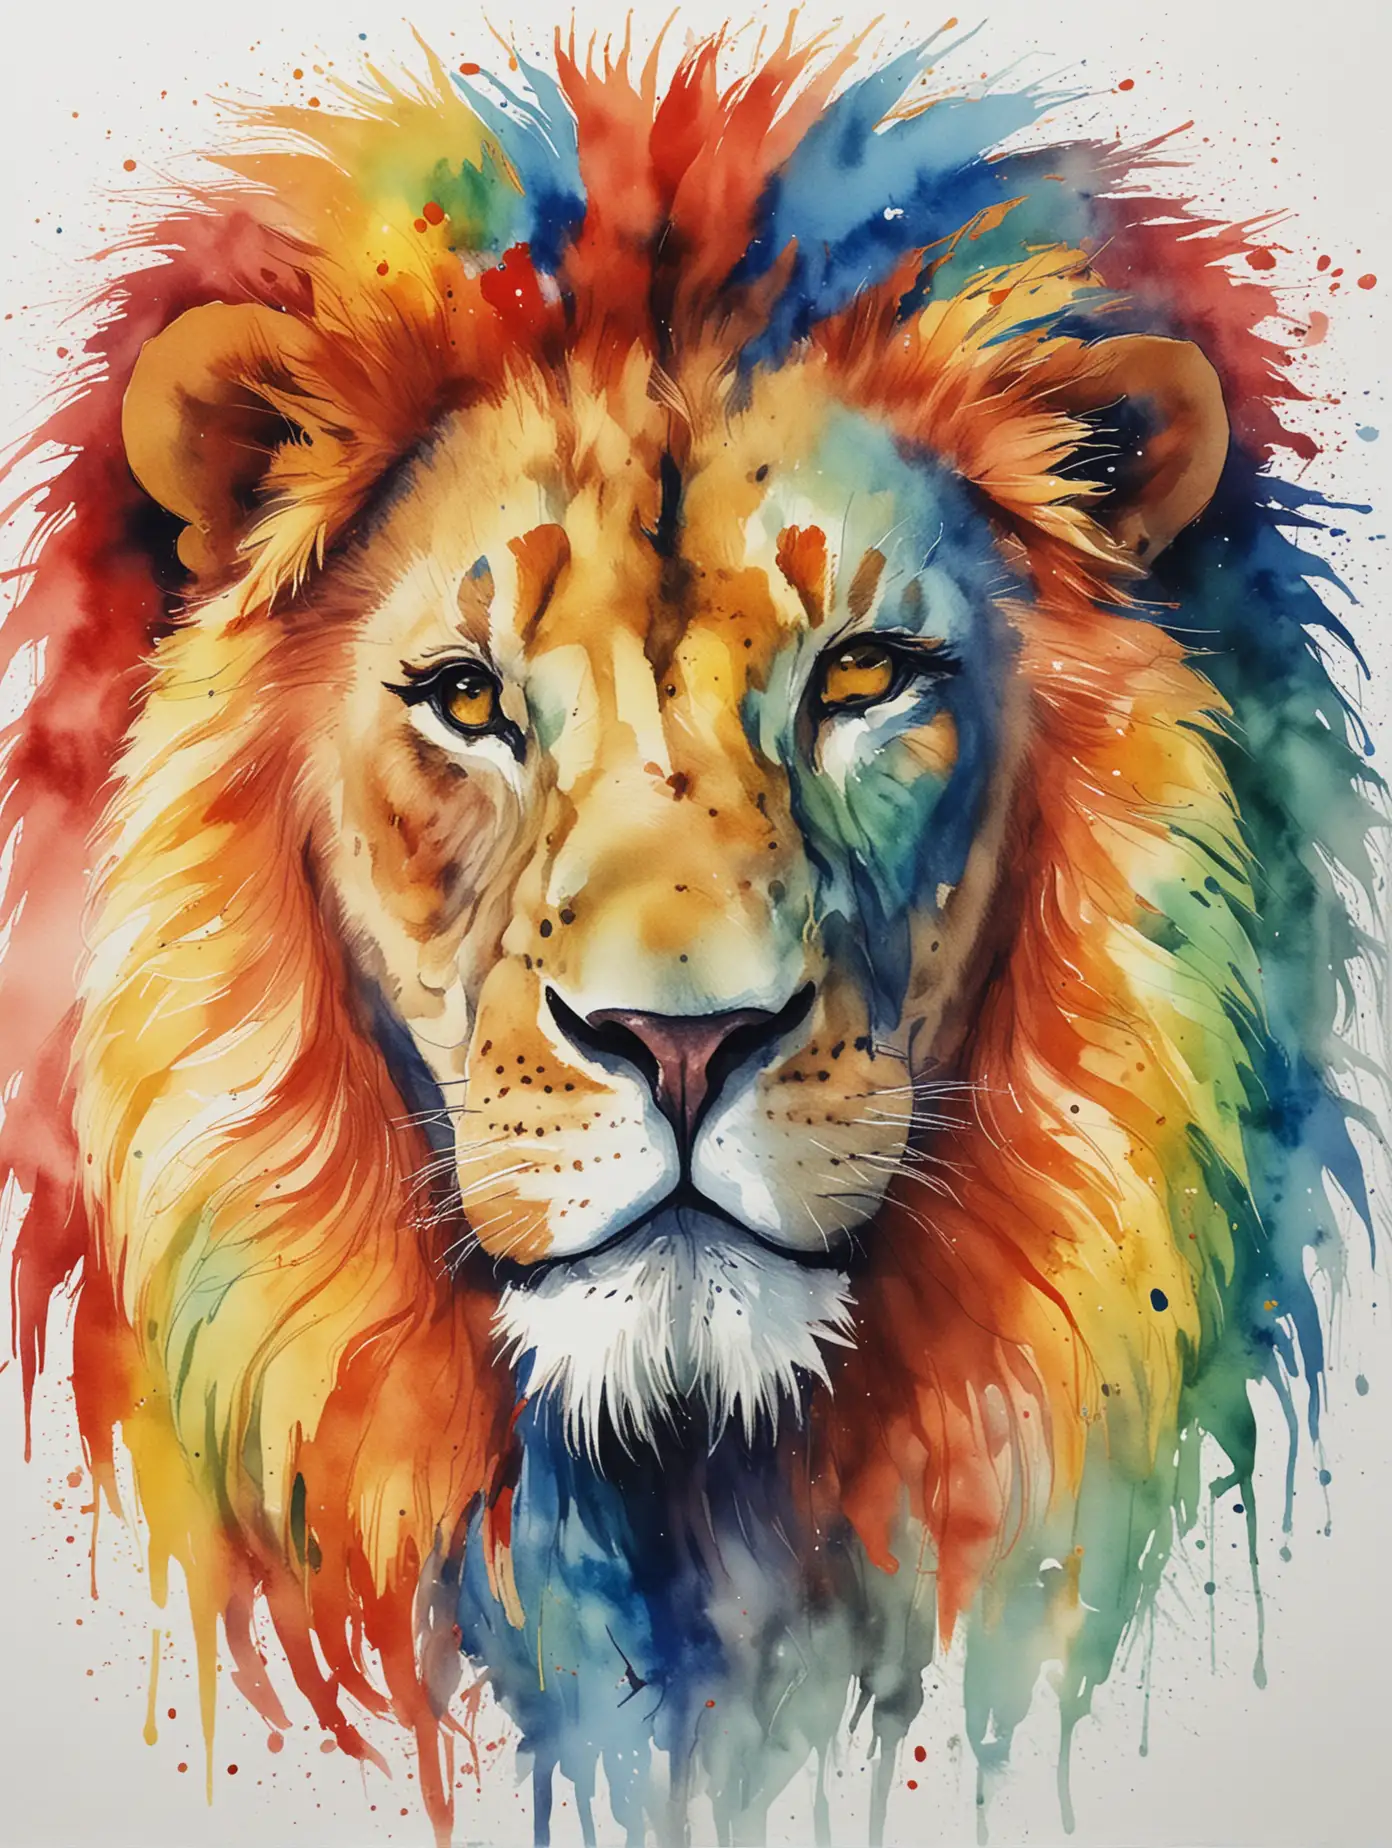 A full cavas captivating red, blue, yellow and green clean, artistic, symbolic, colorful, expressive, minimalist, watercolor, illustration of a lion